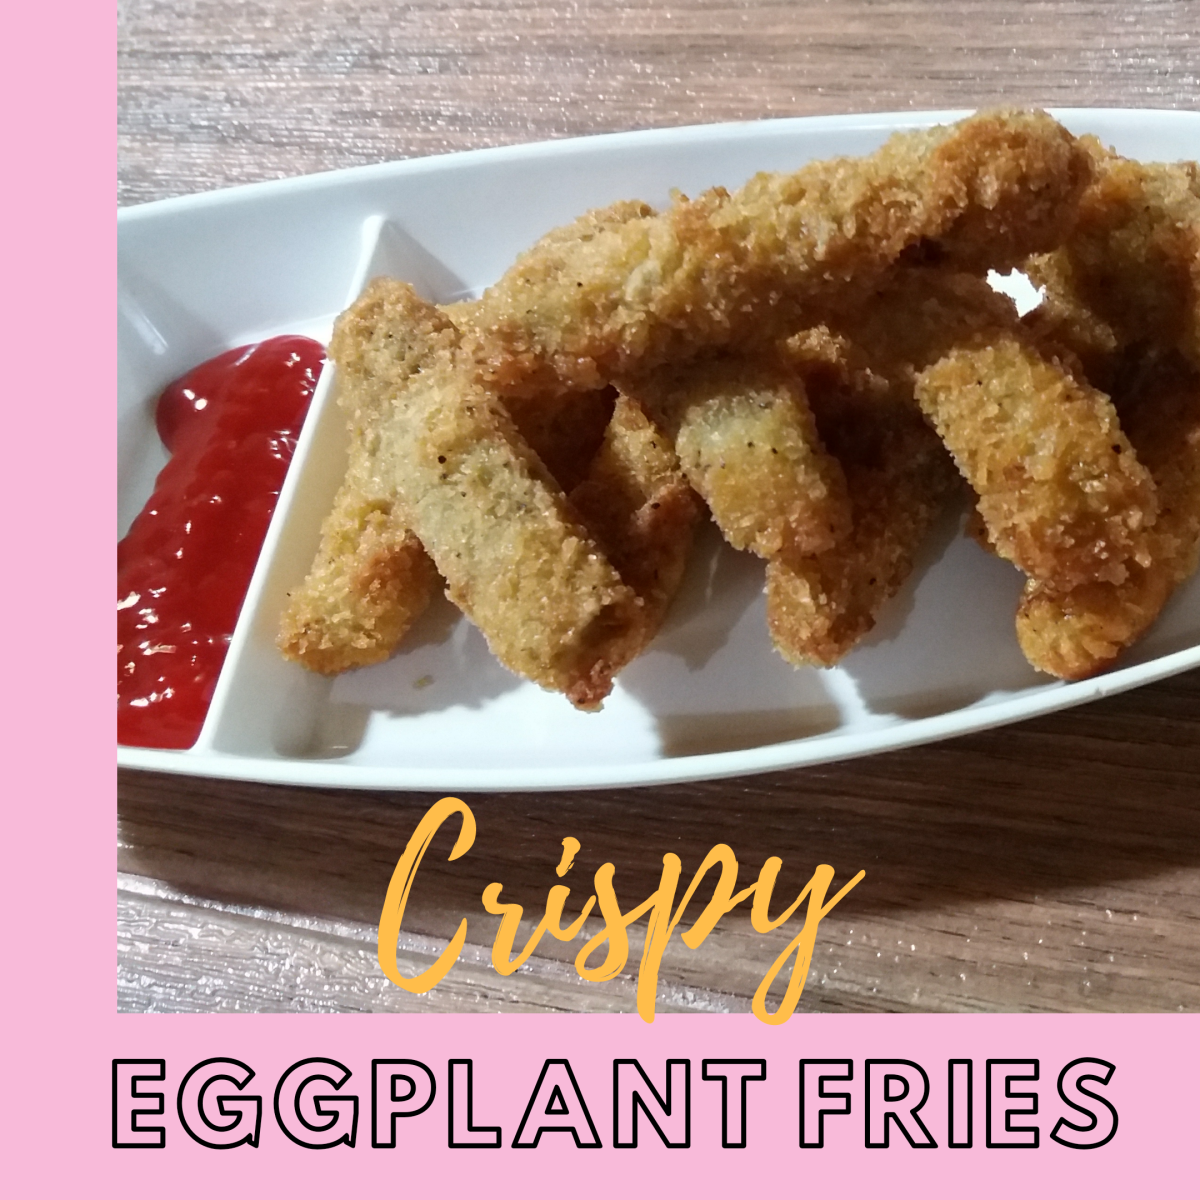 Learn how to cook crispy eggplant fries